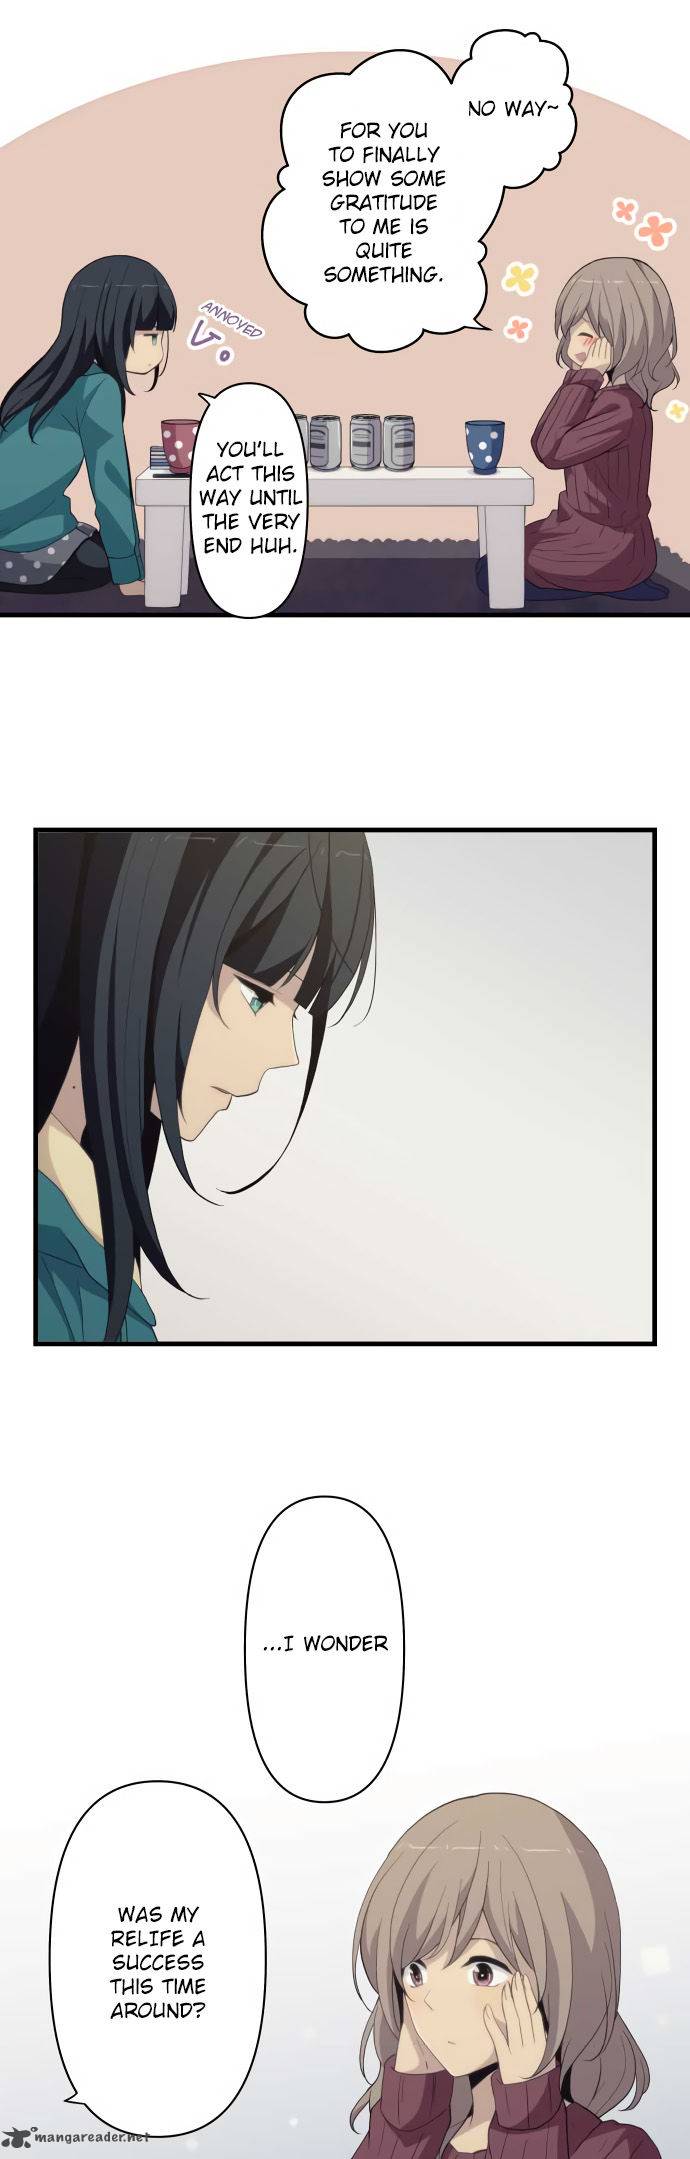 Relife 215 2